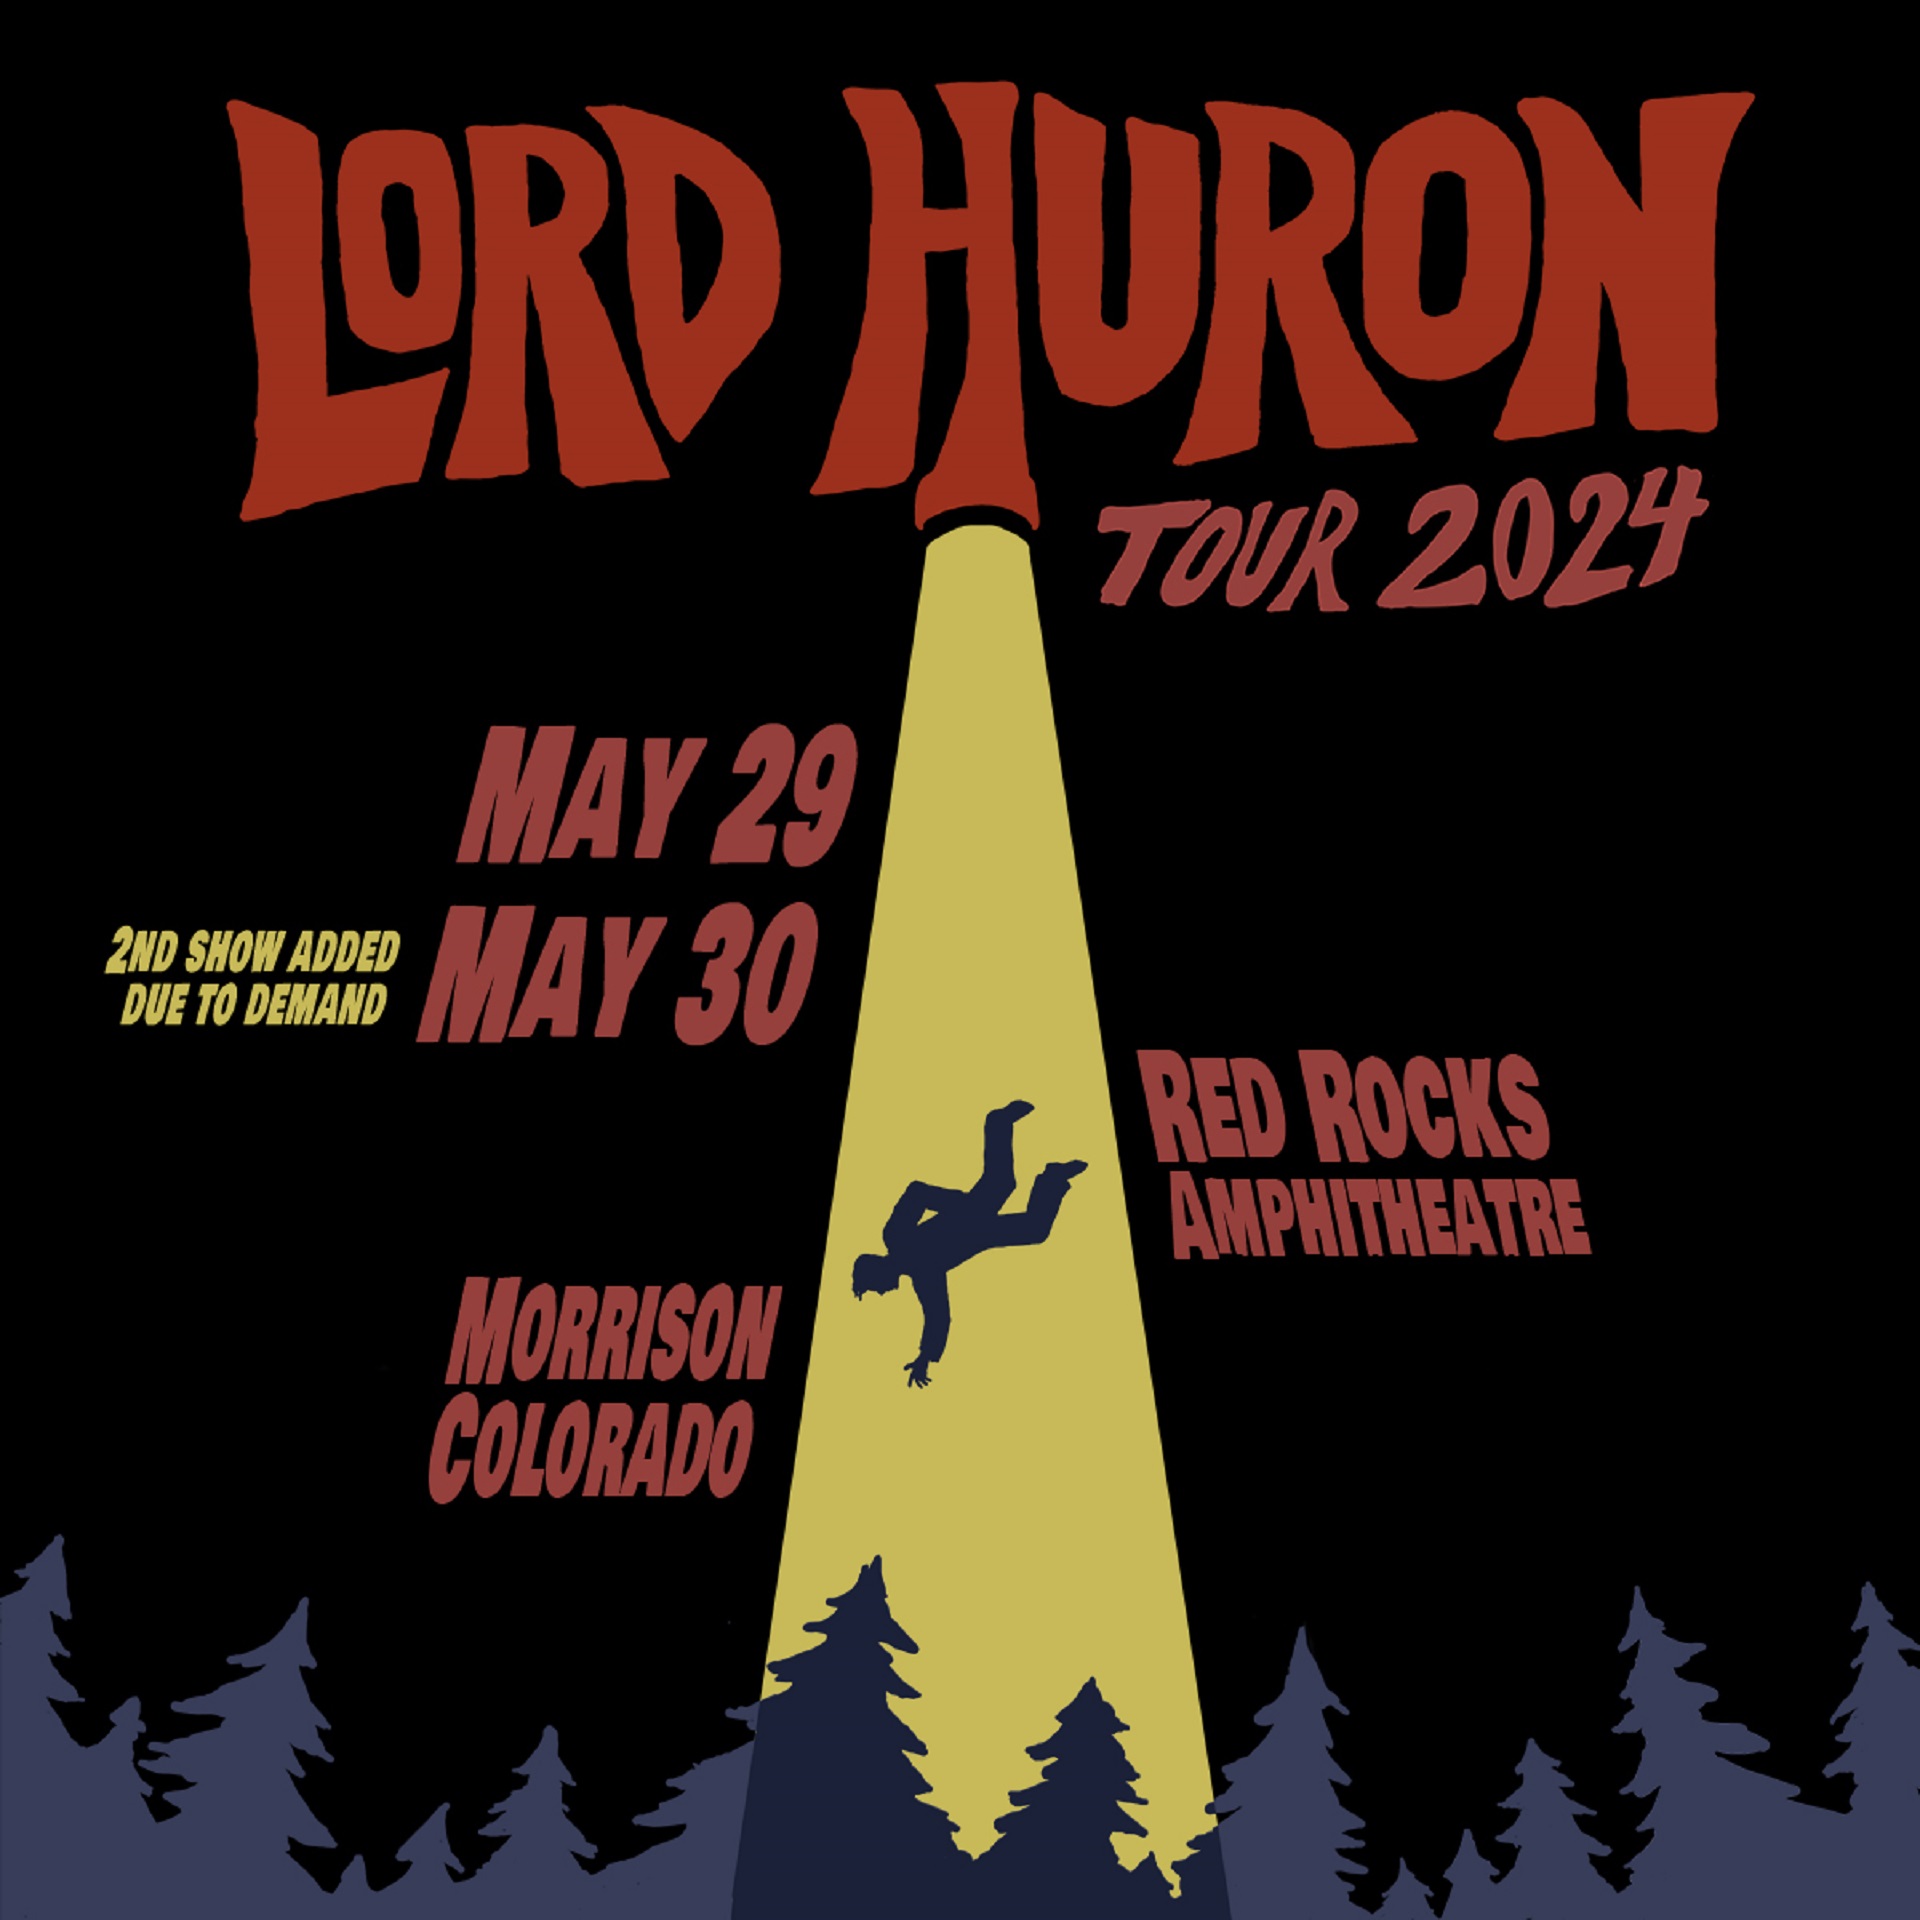 LORD HURON LIVE AT RED ROCKS AMPHITHEATRE – EXTRA DATE ADDED!